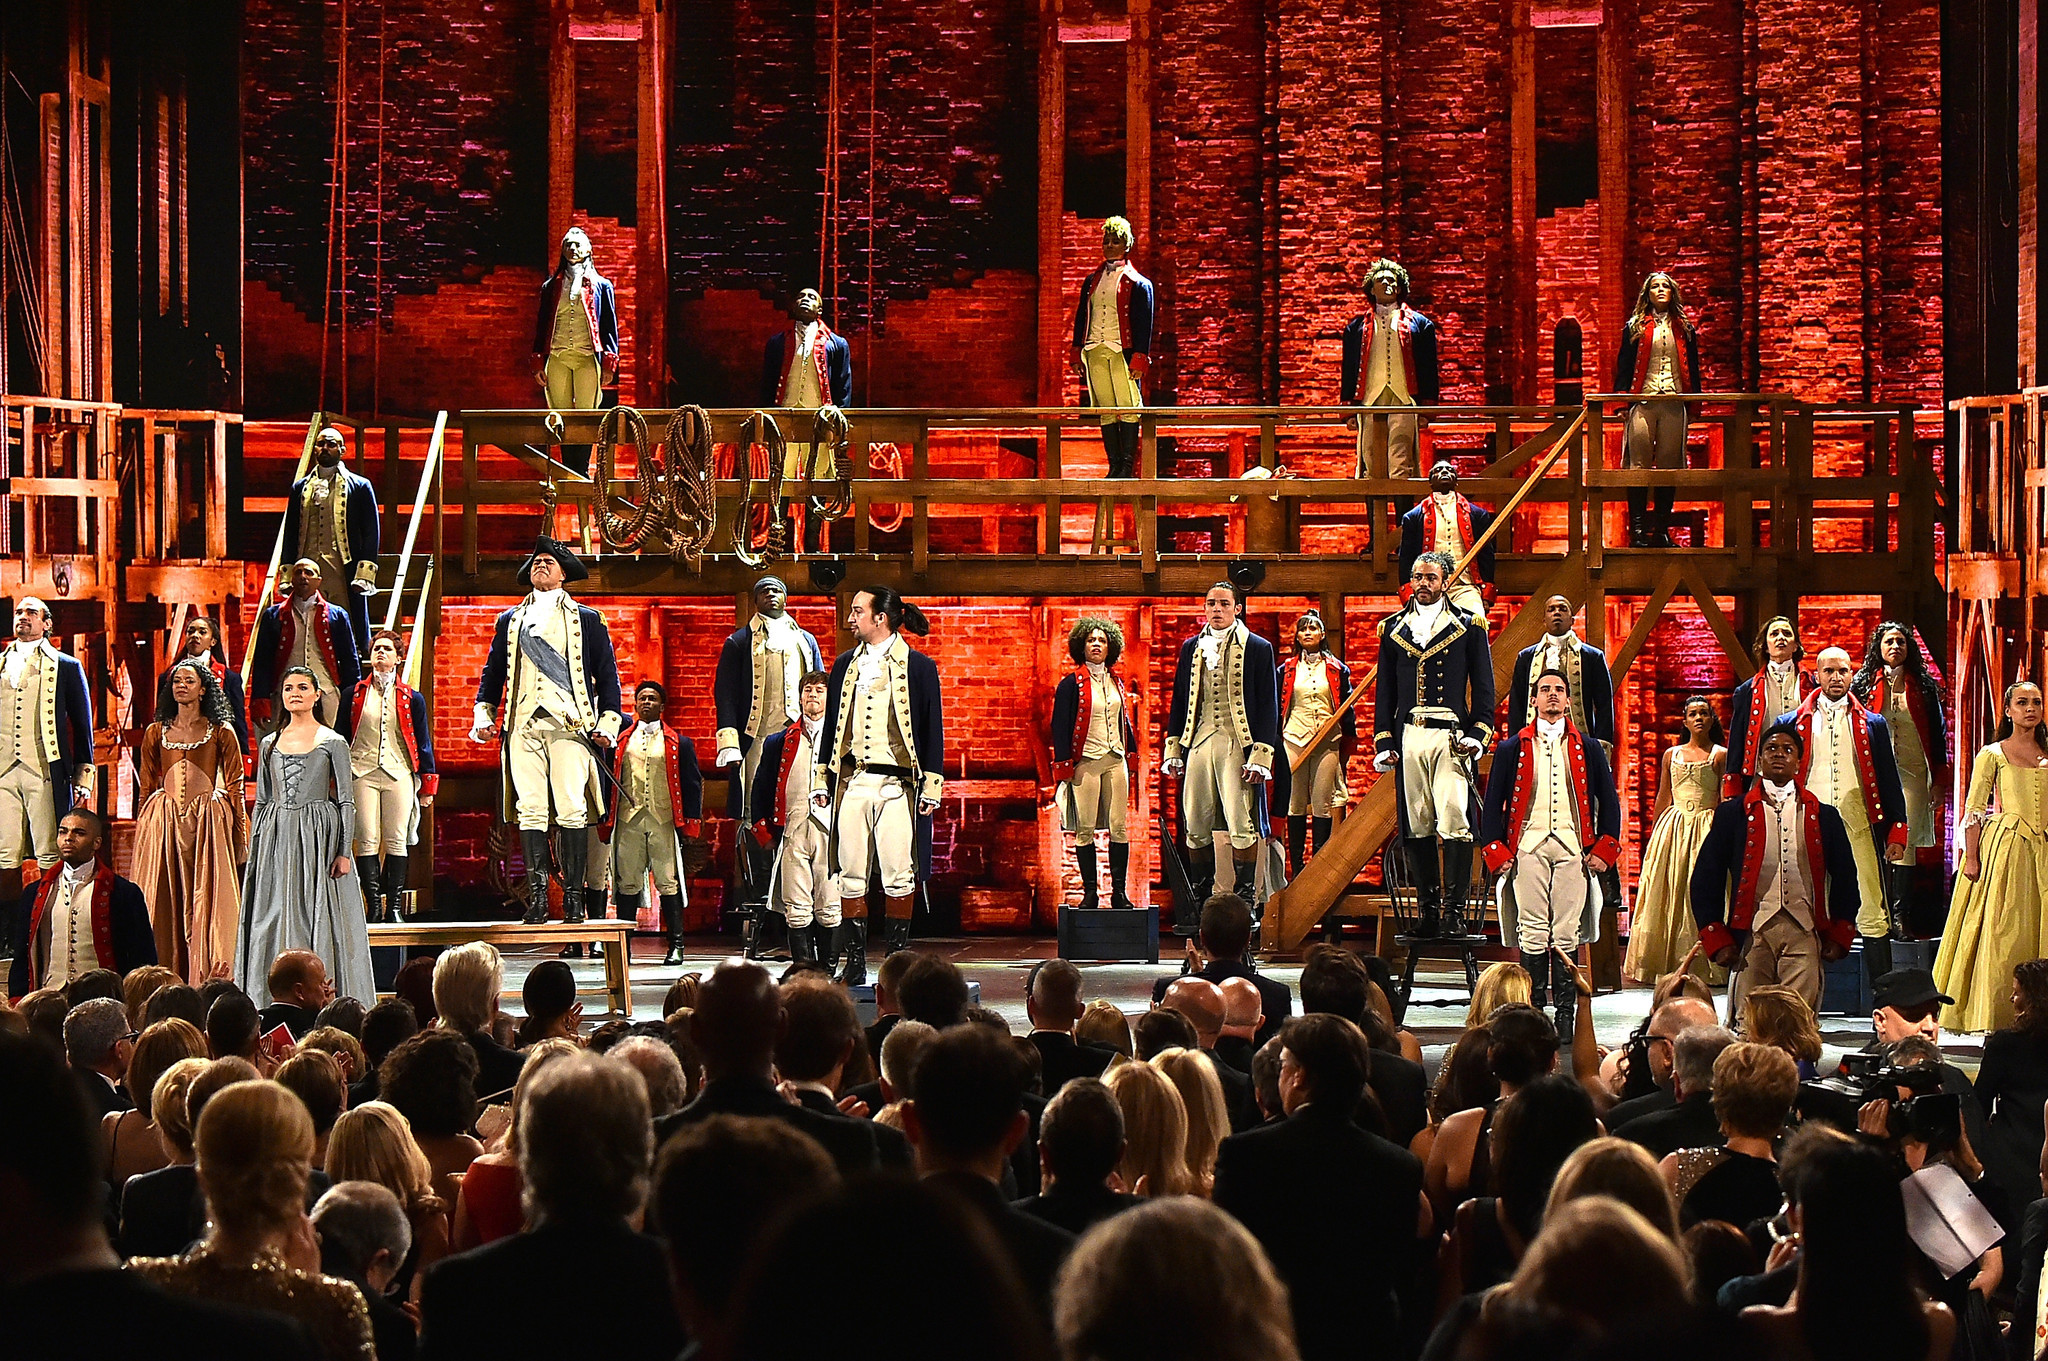 The cast of "Hamilton" performs onstage during the 70th Tony Awards at the Beacon Theatre on June 12 in New York City. (Theo Wargo / Getty Images for Tony Awards Productions)